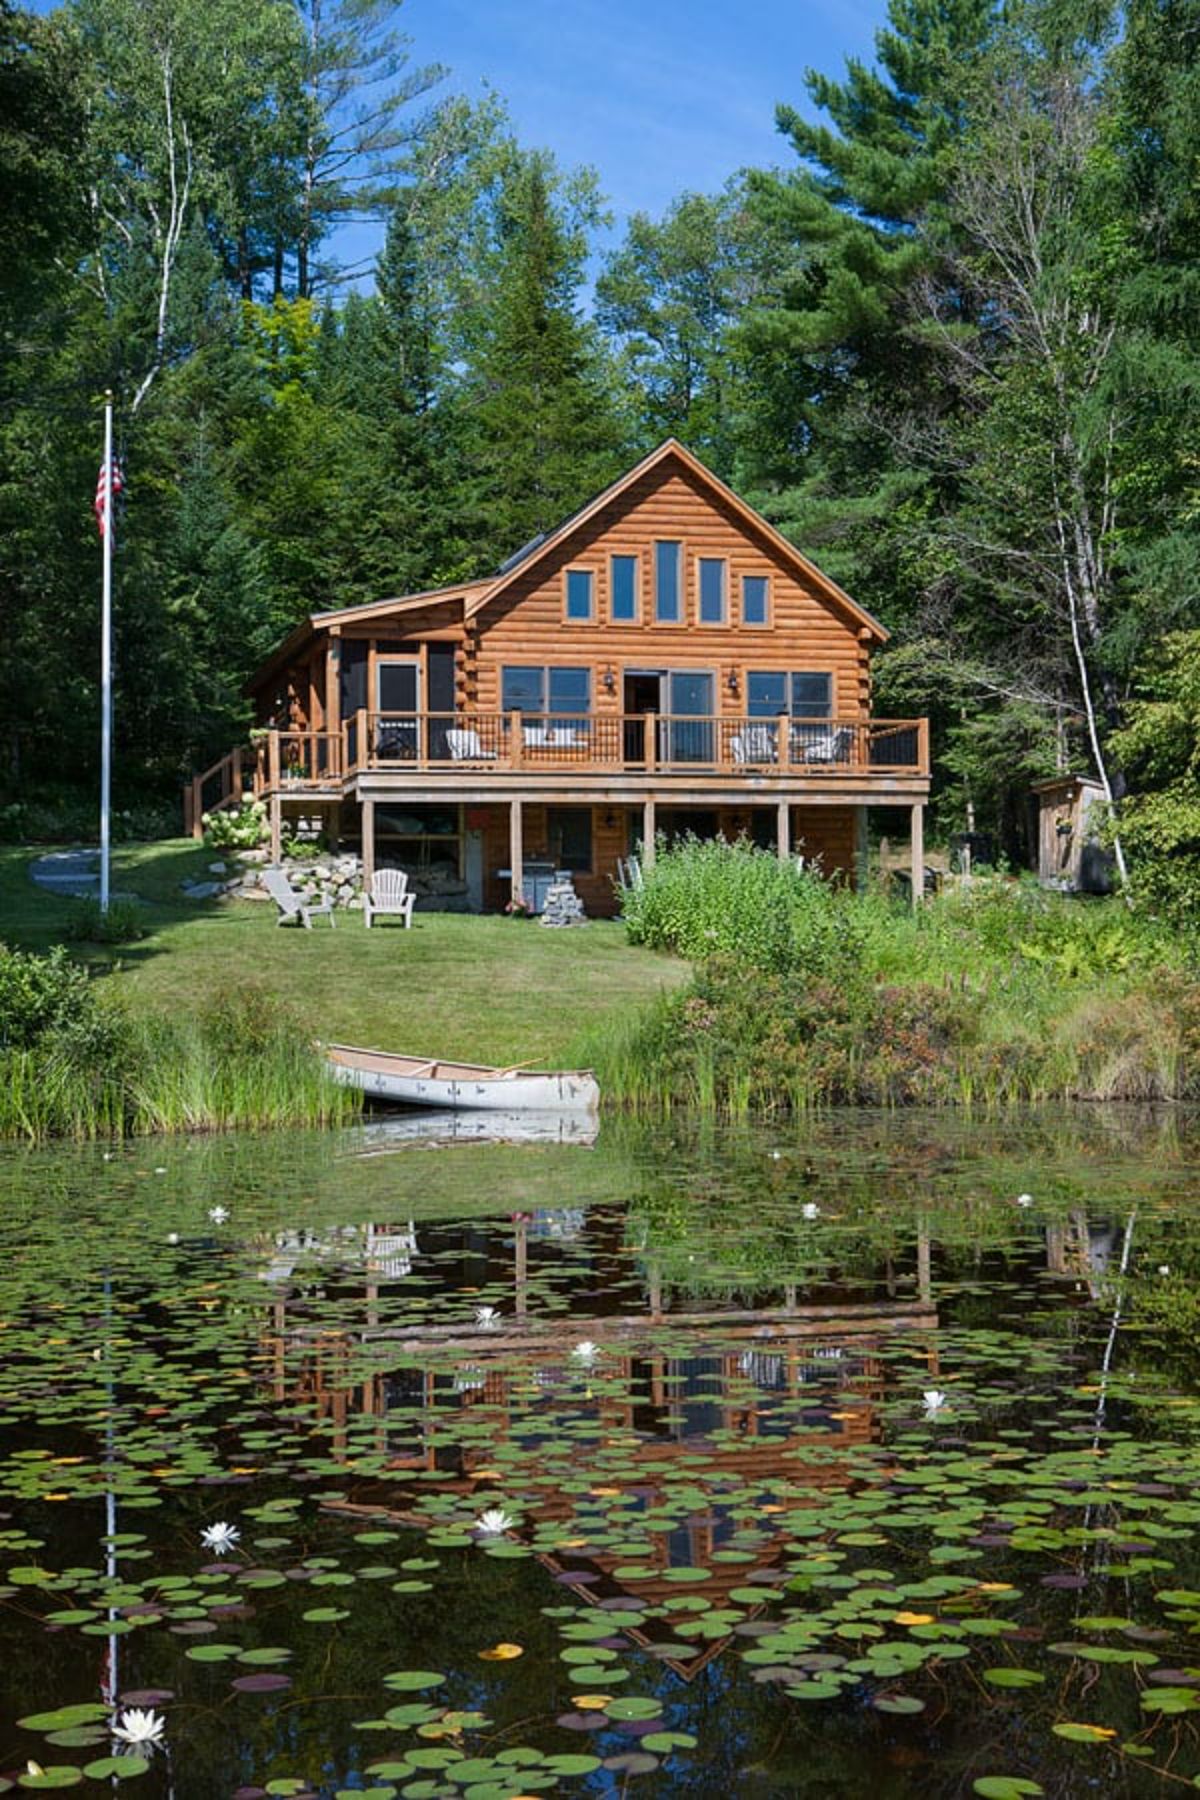 log cabin on hill above pond with small boat in edge of pond